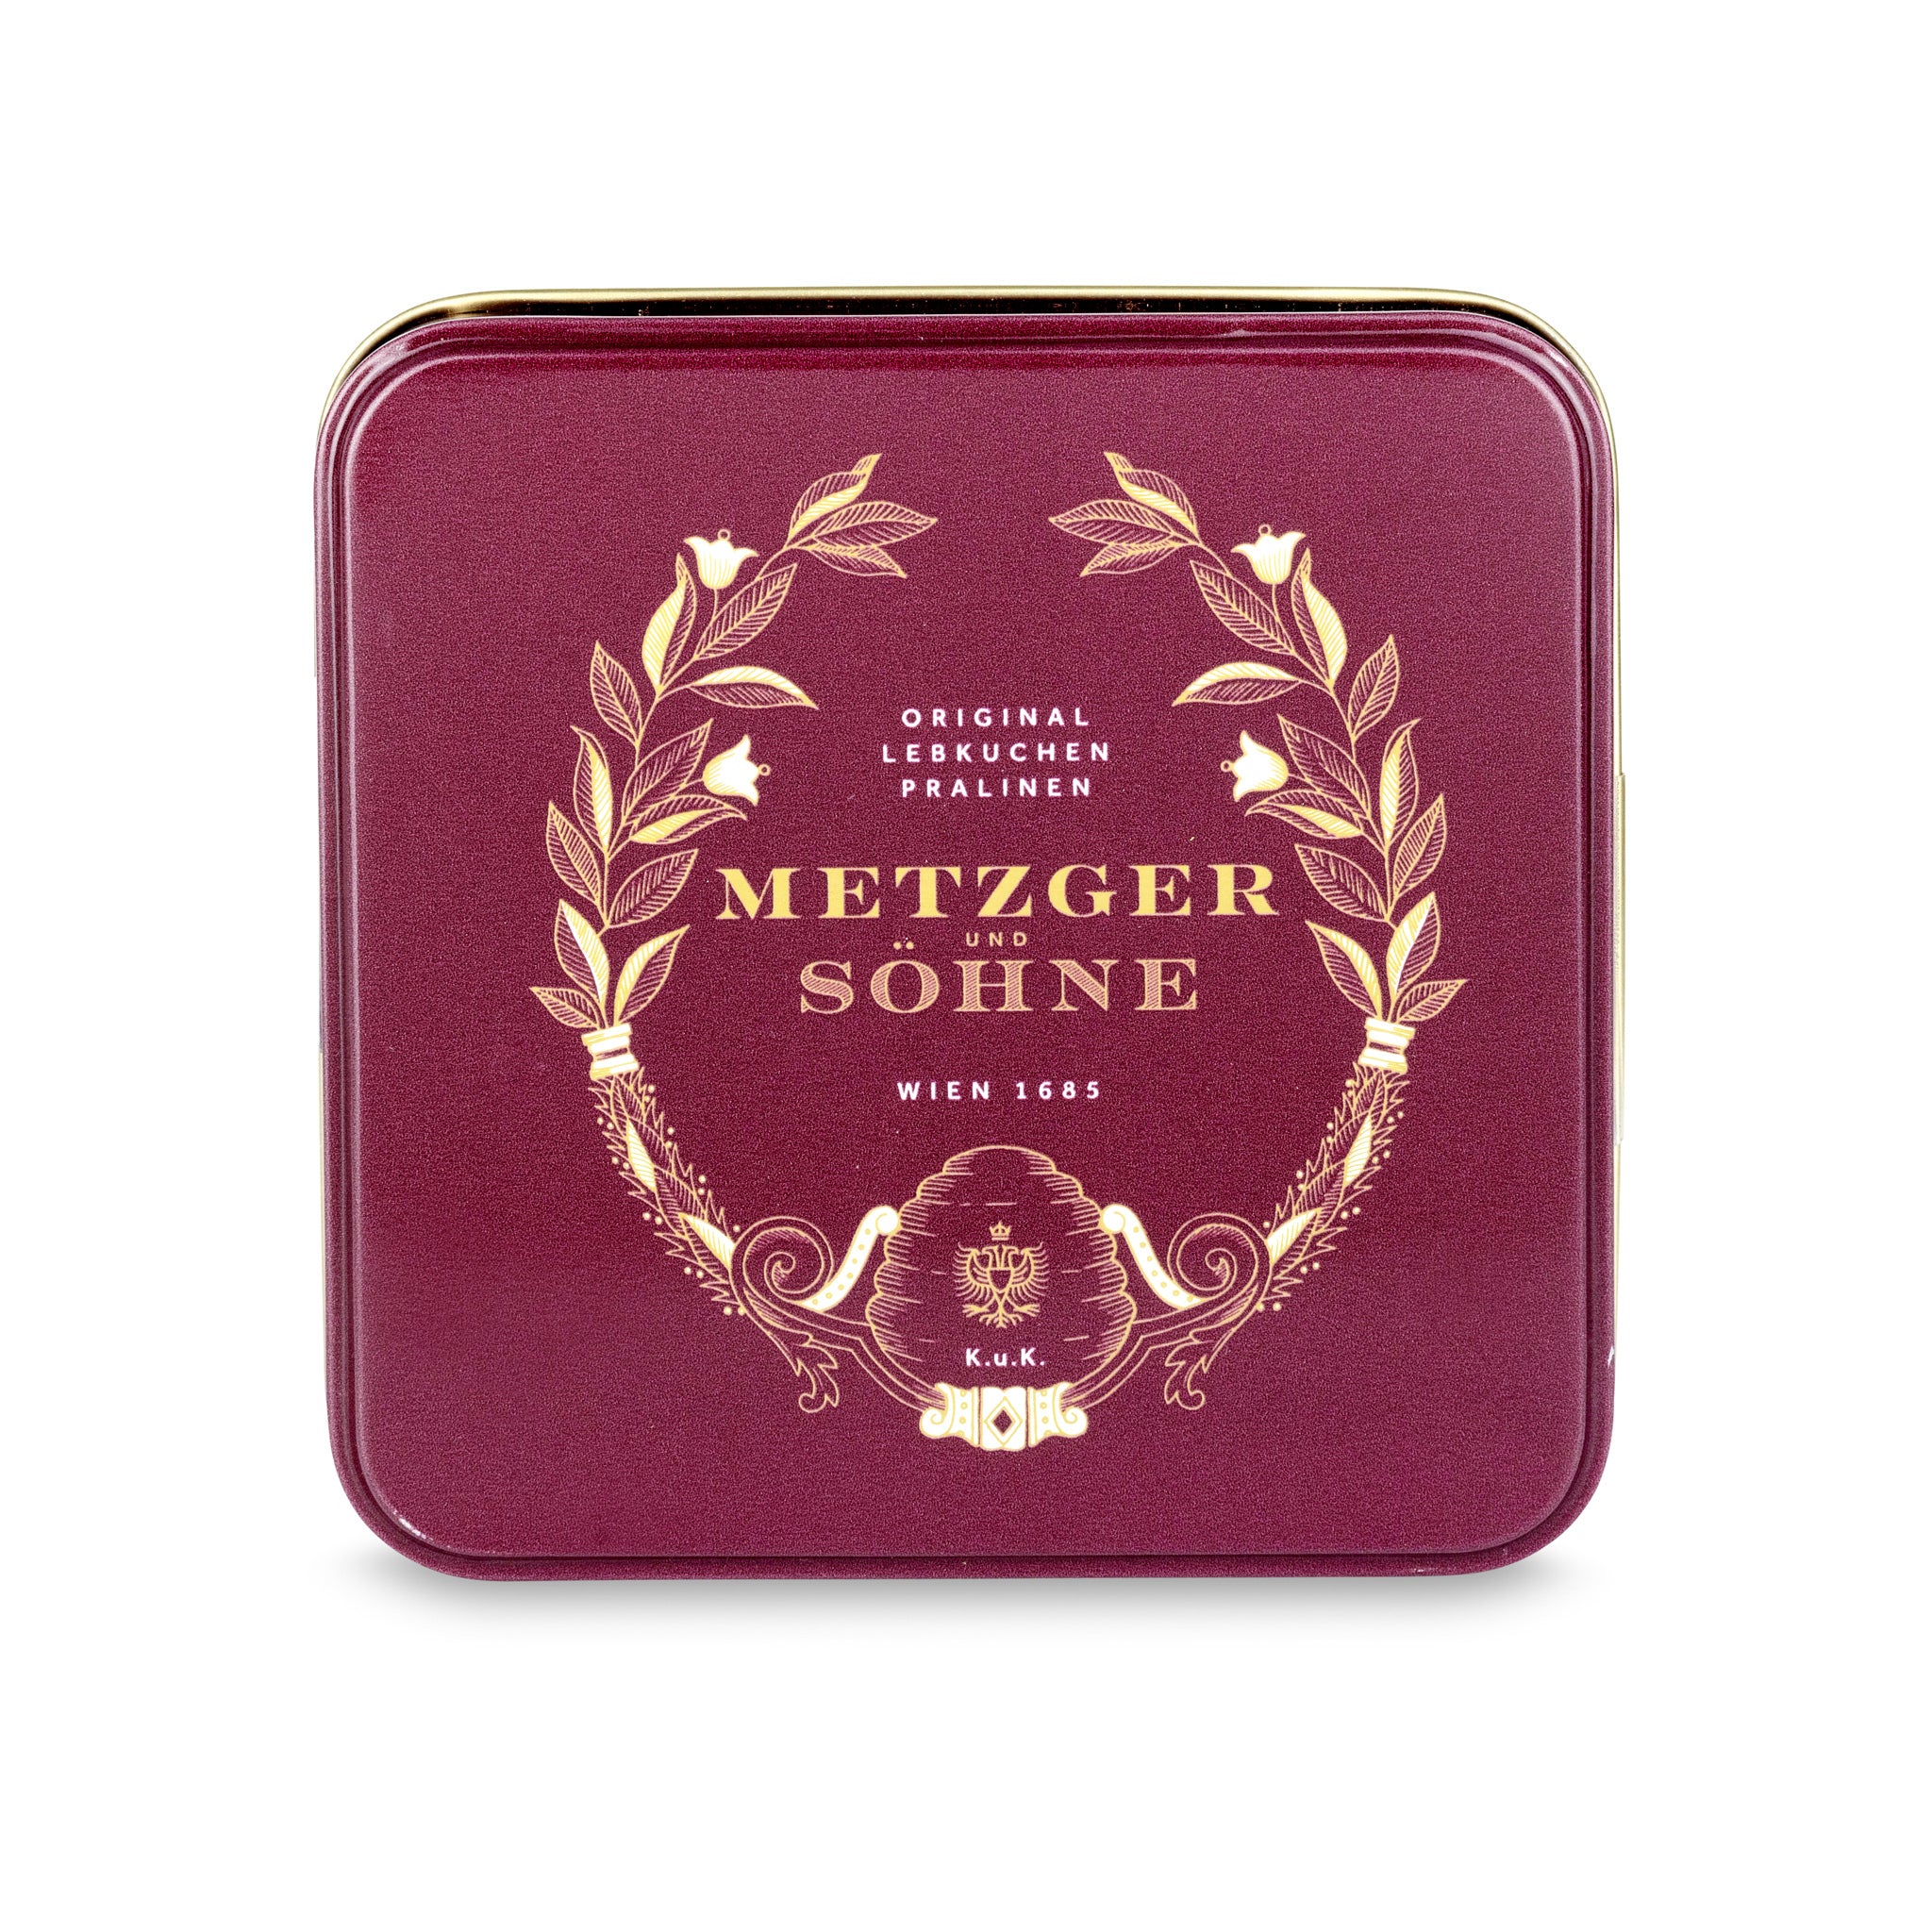 A perfect gift for a special occasion. Metzger's signature luxury tin in opulent red, filled with with 9 delectable Lebkuchen chocolate pralines. Each praline is layered with Lebkuchen 'honey cake' and filled with marzipan, nuts or fruit jams and jellies, encased in rich chocolate. Suitable for vegetarians.